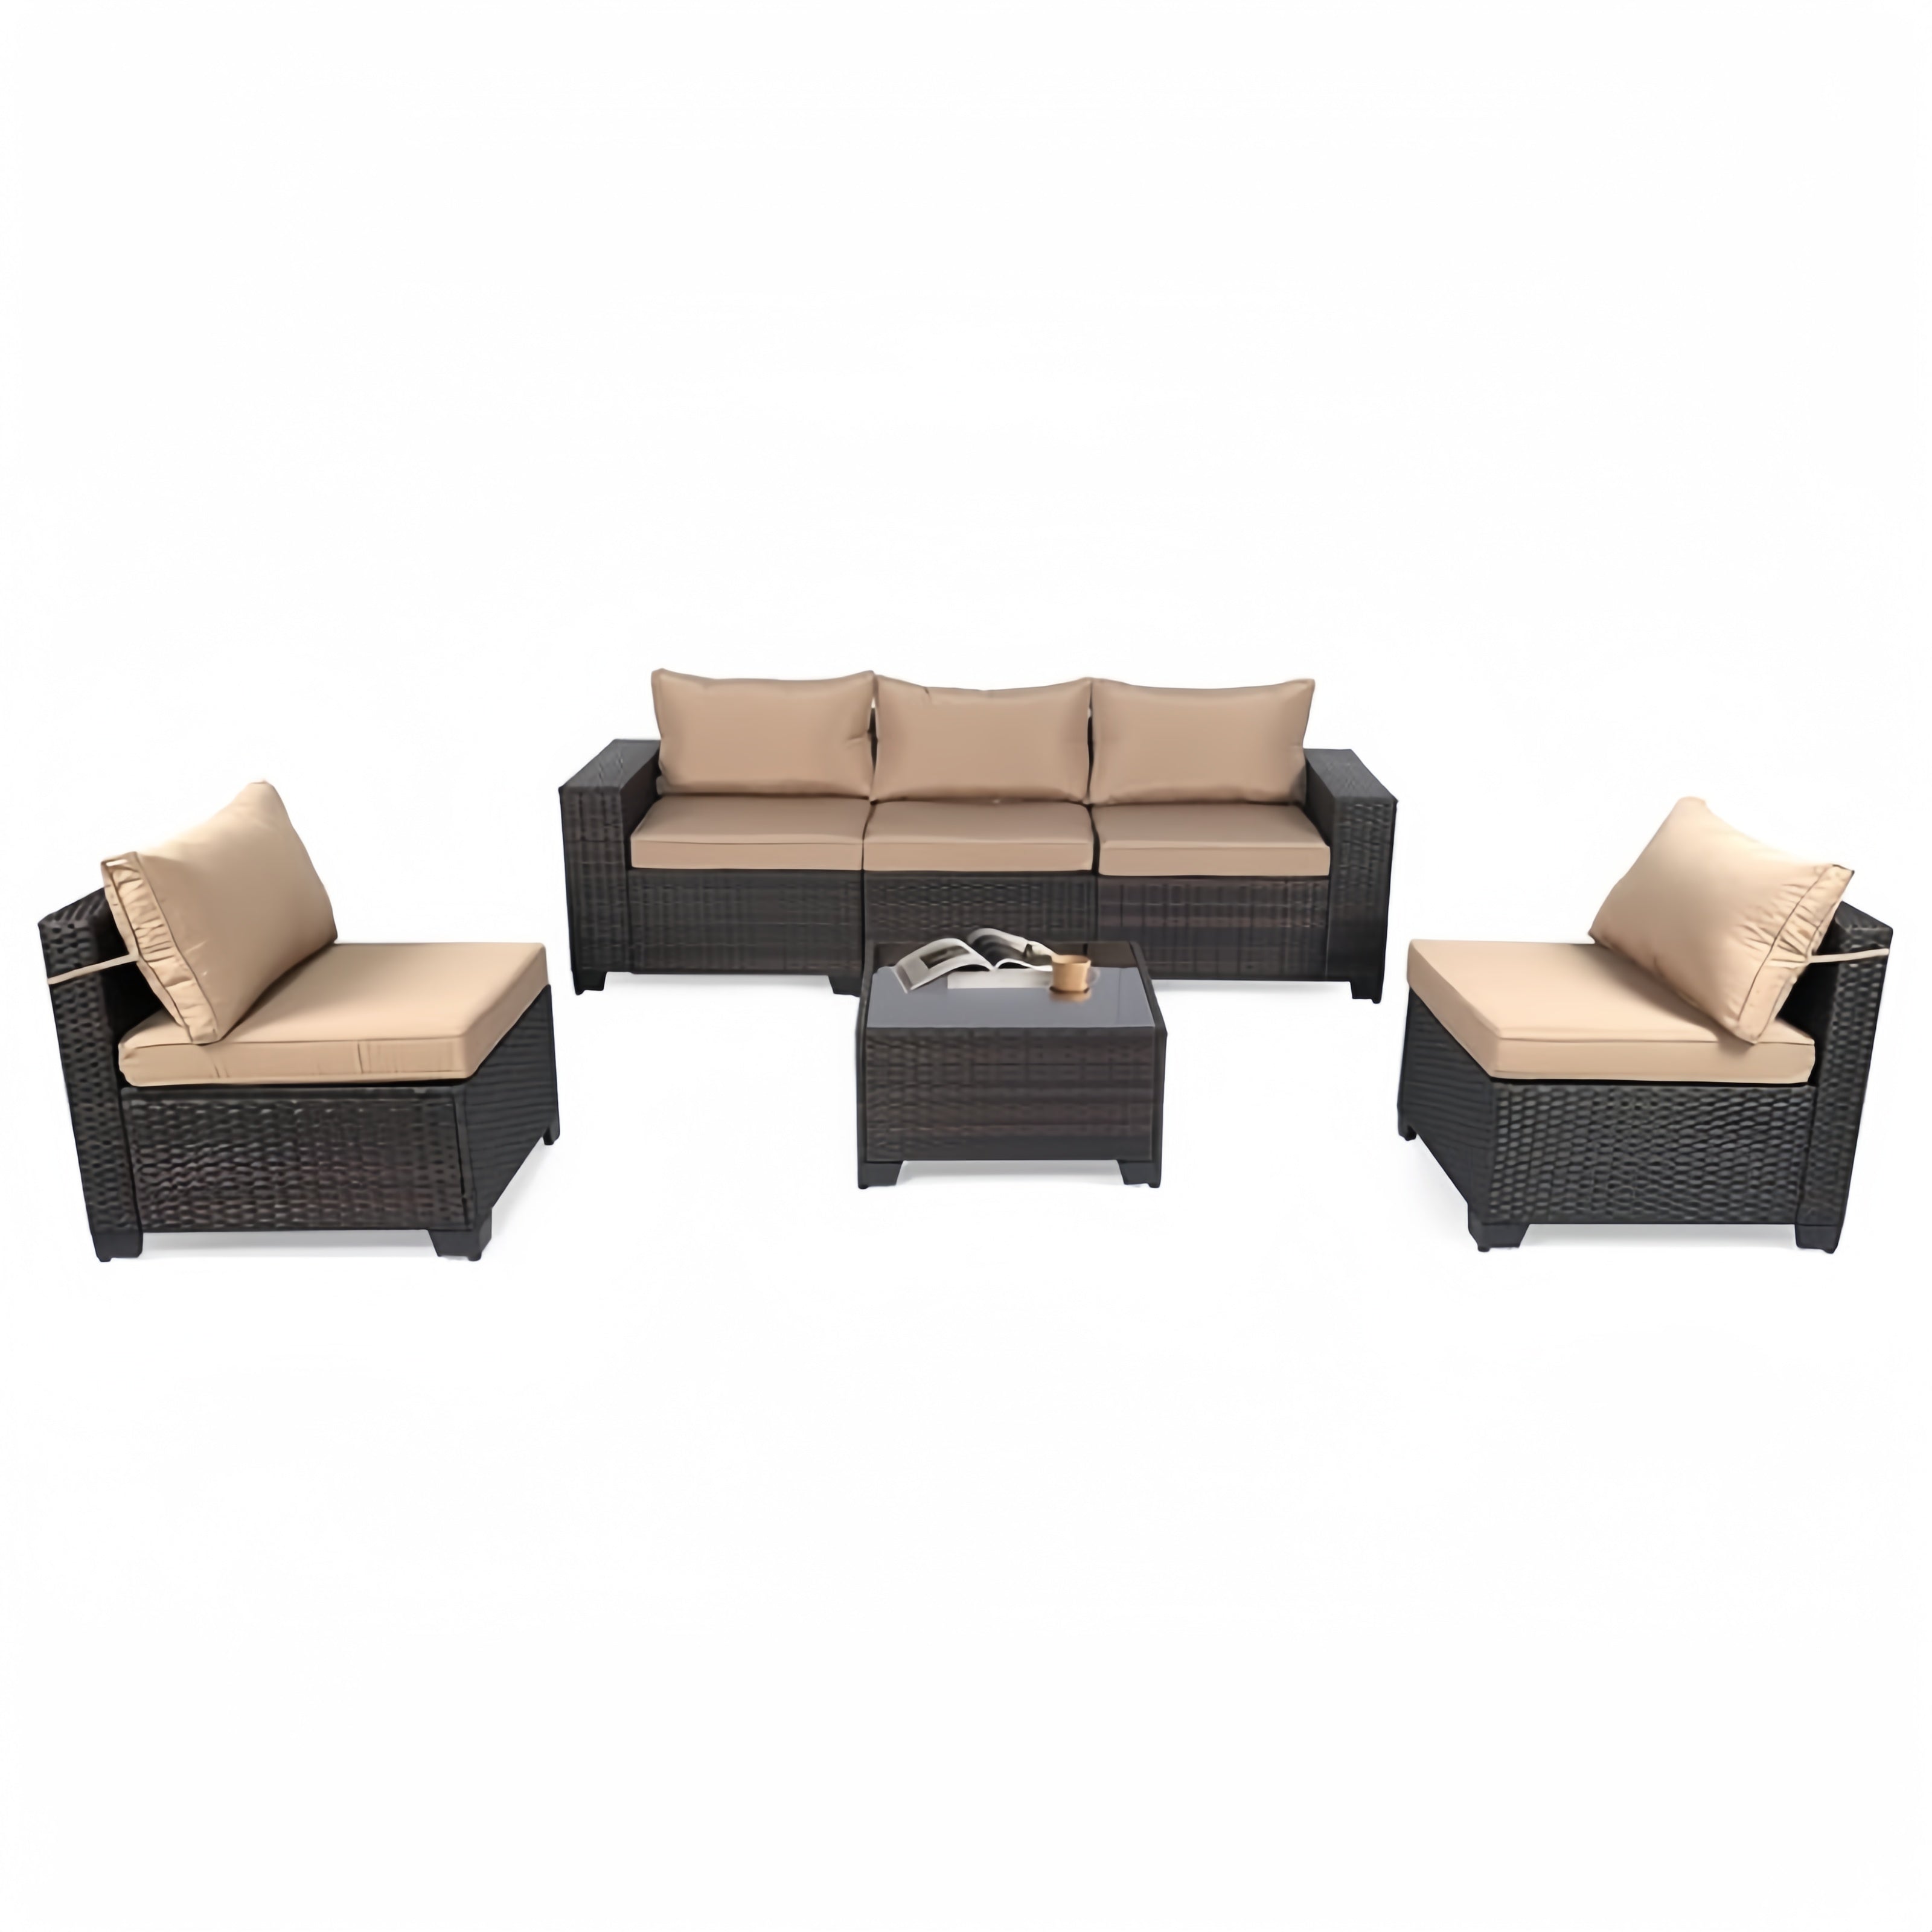 Outdoor Rattan Conversation Sectional Patio Furniture Set 6 Piece with Manual Wicker Weaving, Table & Wide Armrests